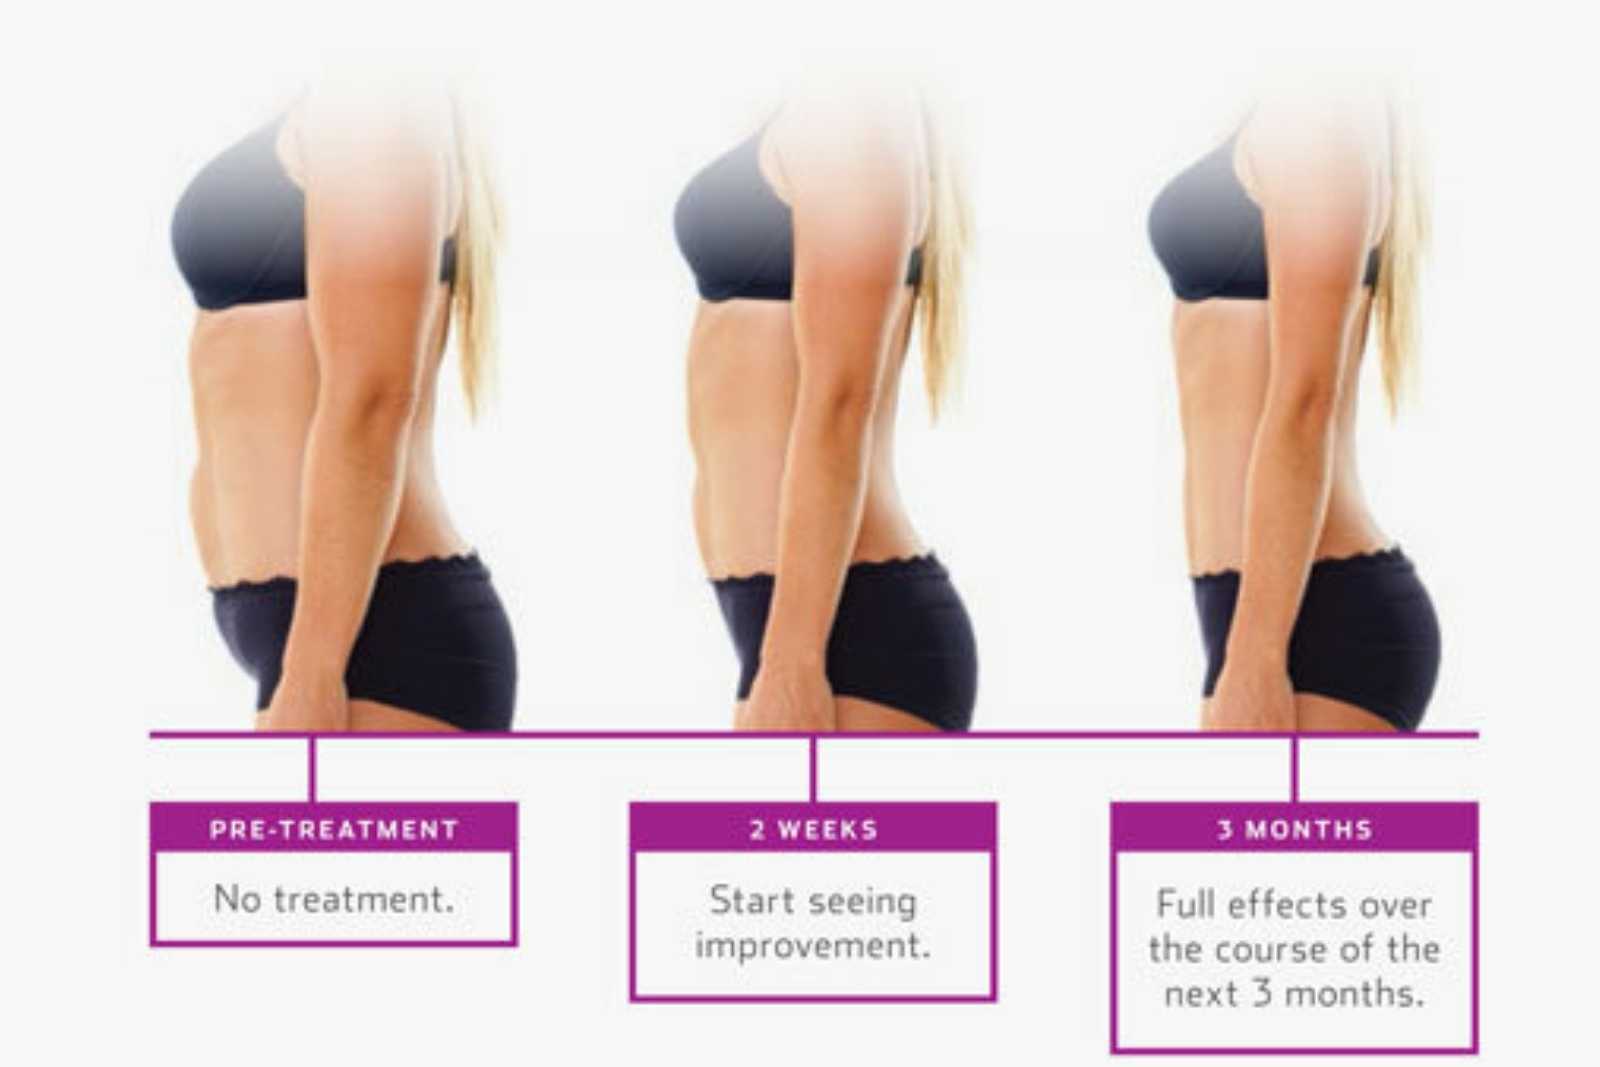 Body Contouring - The Skinny on Body Shaping Surgery Procedures